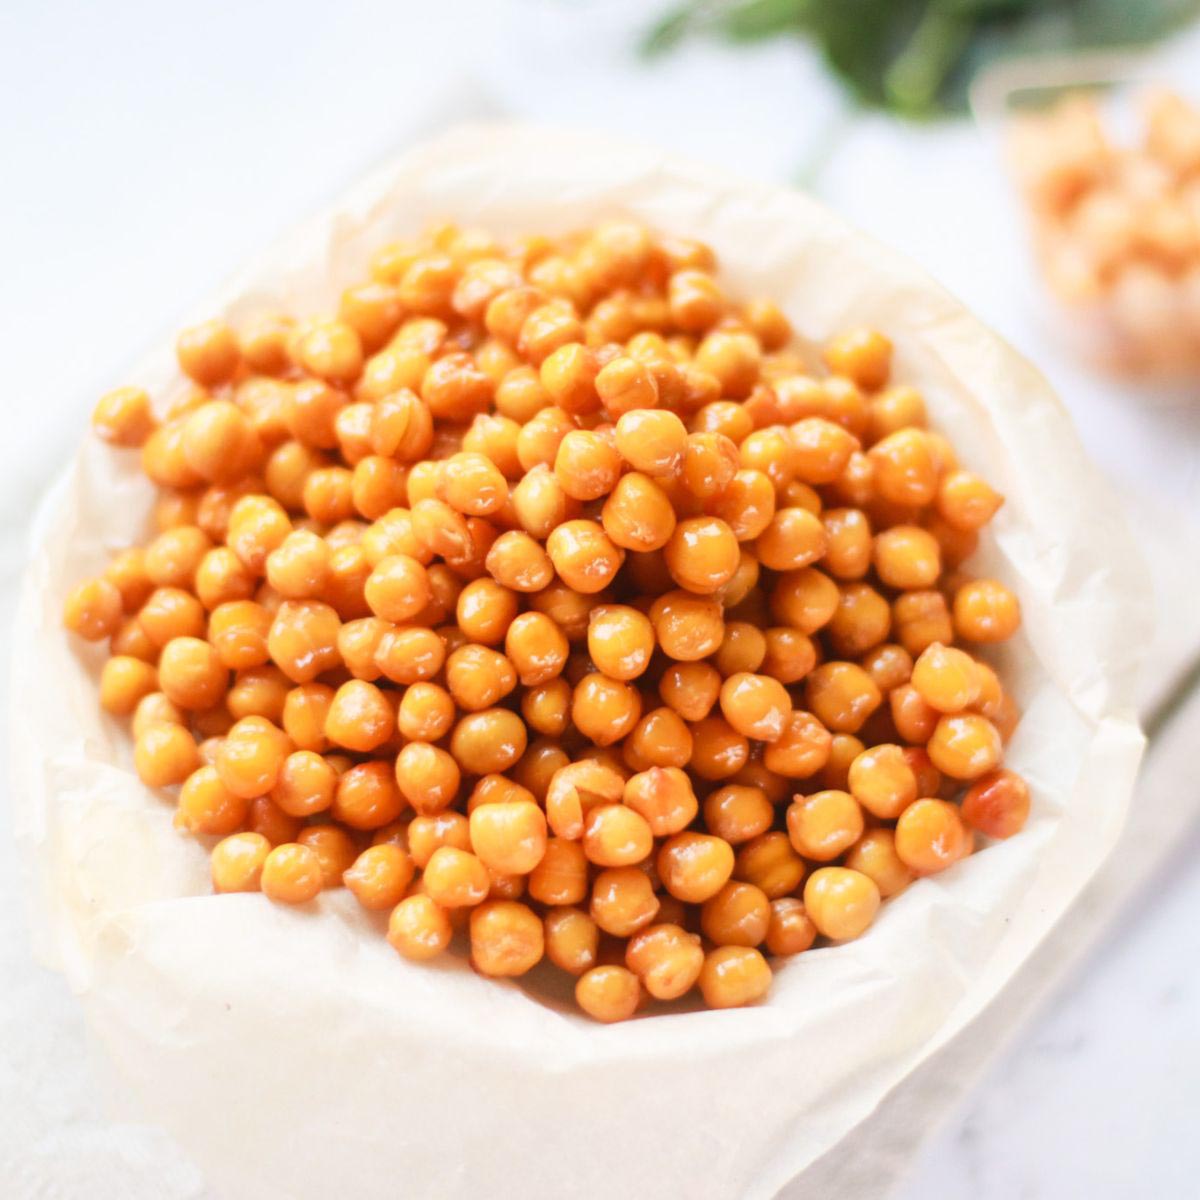 crispy oven roasted chickpeas thumbnail picture.